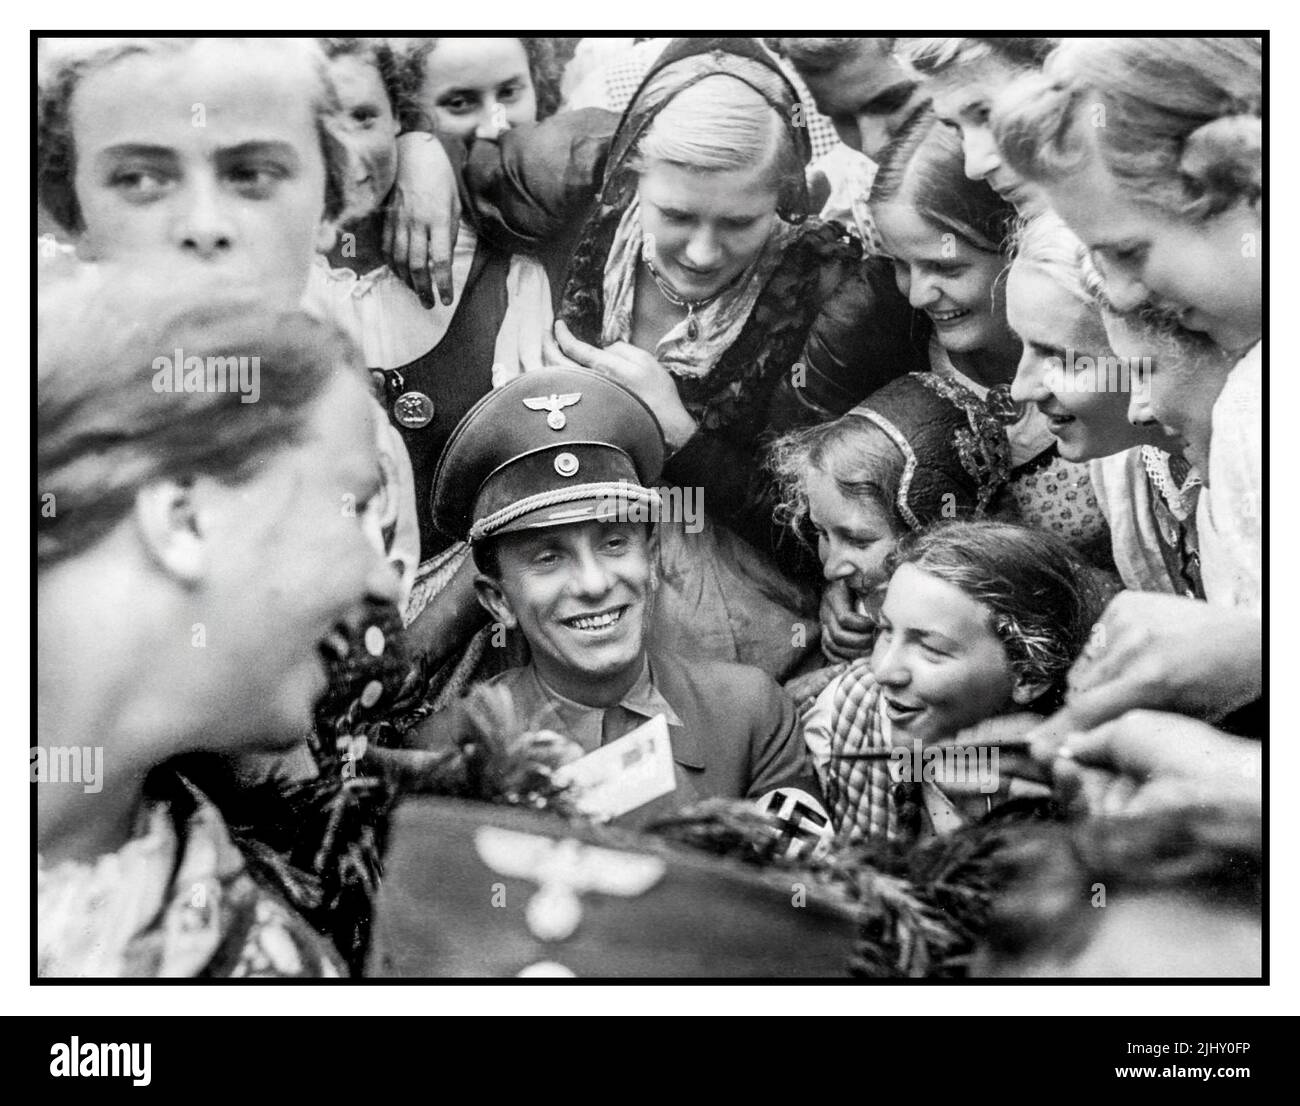 Nazi leader Joseph Goebbels surrounded by enthusiastic League of German Girls or the Band of German Maidens (German: Bund Deutscher Mädel, abbreviated as BDM)  the girls' wing of the Nazi Party youth movement, the Hitler Youth. Paul Joseph Goebbels, (born October 29, 1897, Rheydt, Germany—died May 1, 1945, Berlin), minister of propaganda for the German Third Reich under Adolf Hitler. A master orator and propagandist, he presented a favourable image of the Nazi regime to the German people. Adolf Hitler created the Reich Ministry of Public Enlightenment & Propaganda with Goebbels at its head. Stock Photo